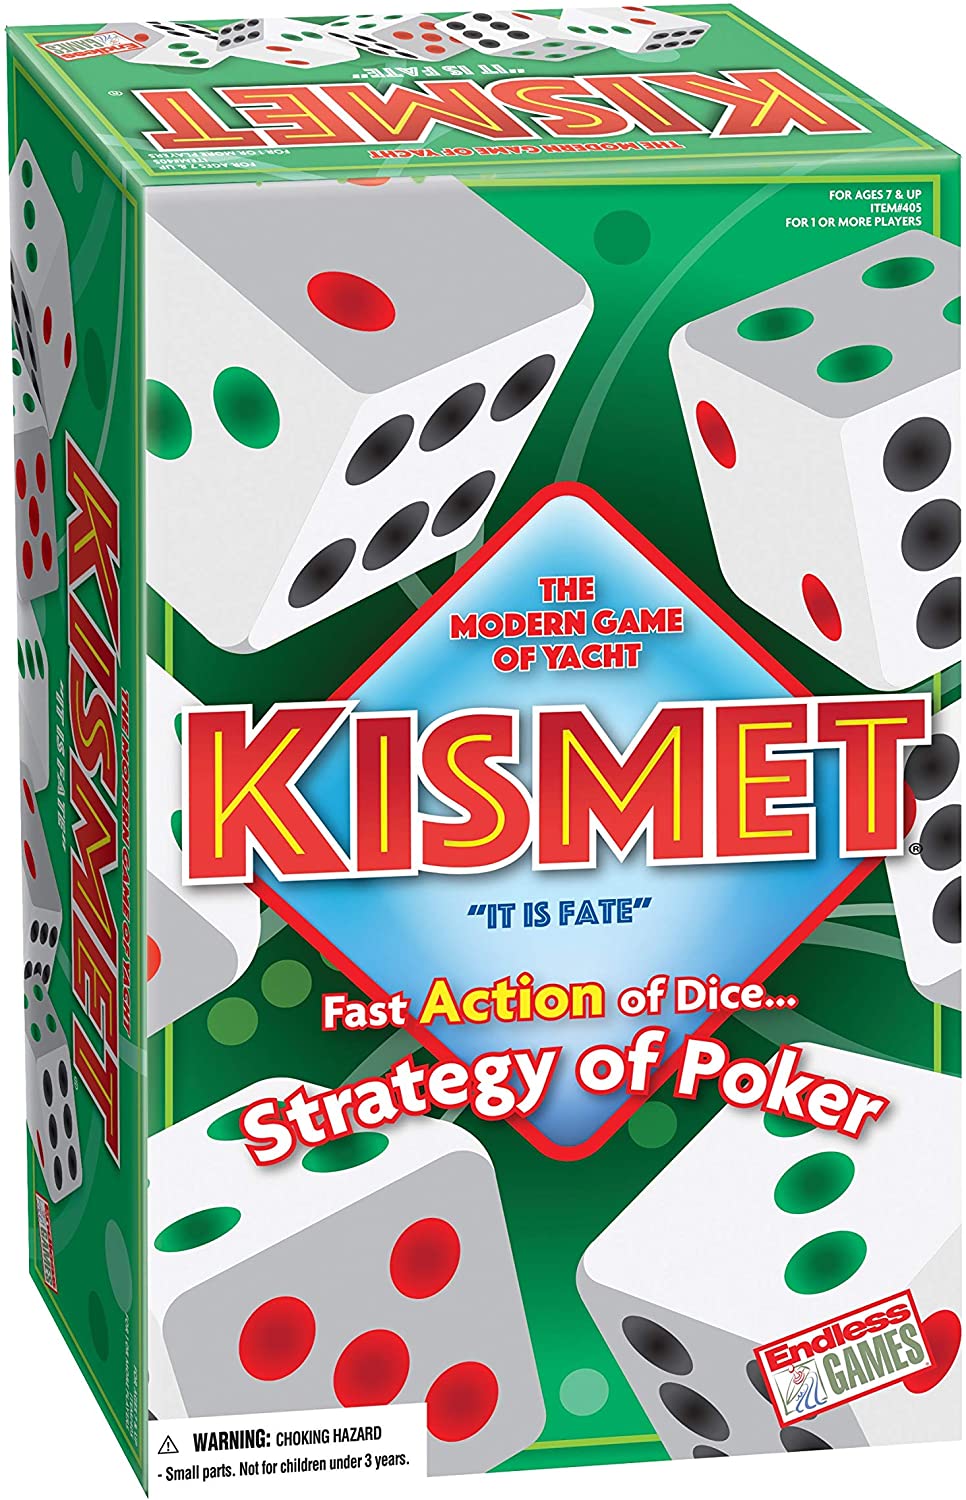 Kismet - The Modern GAME of Yacht - Family Dice GAME